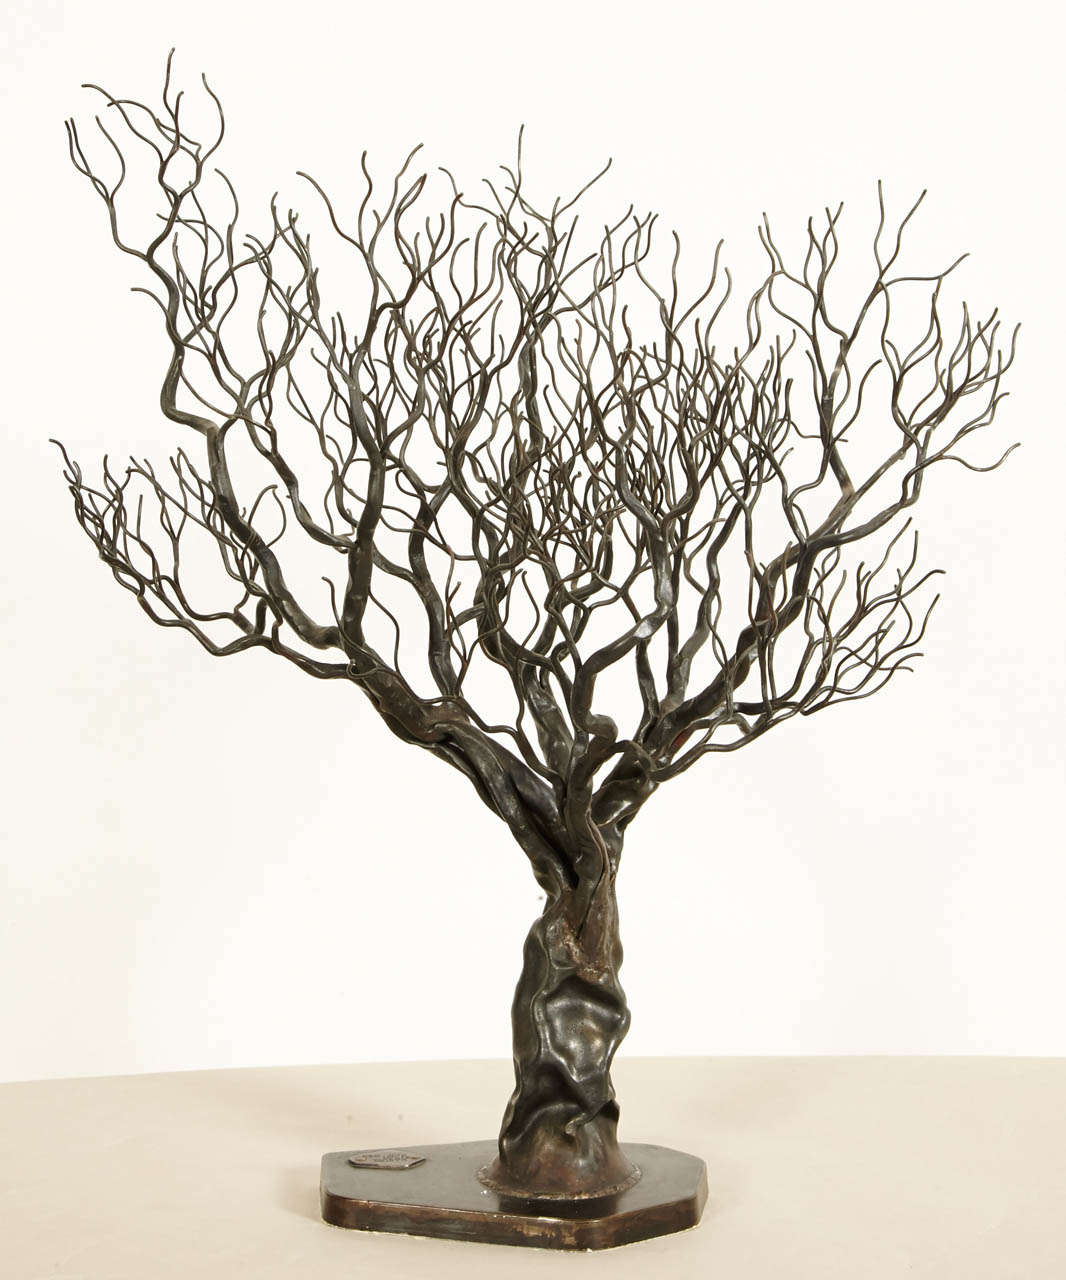 Forged Iron Olive Tree, 2012, by Manuel Simon 1